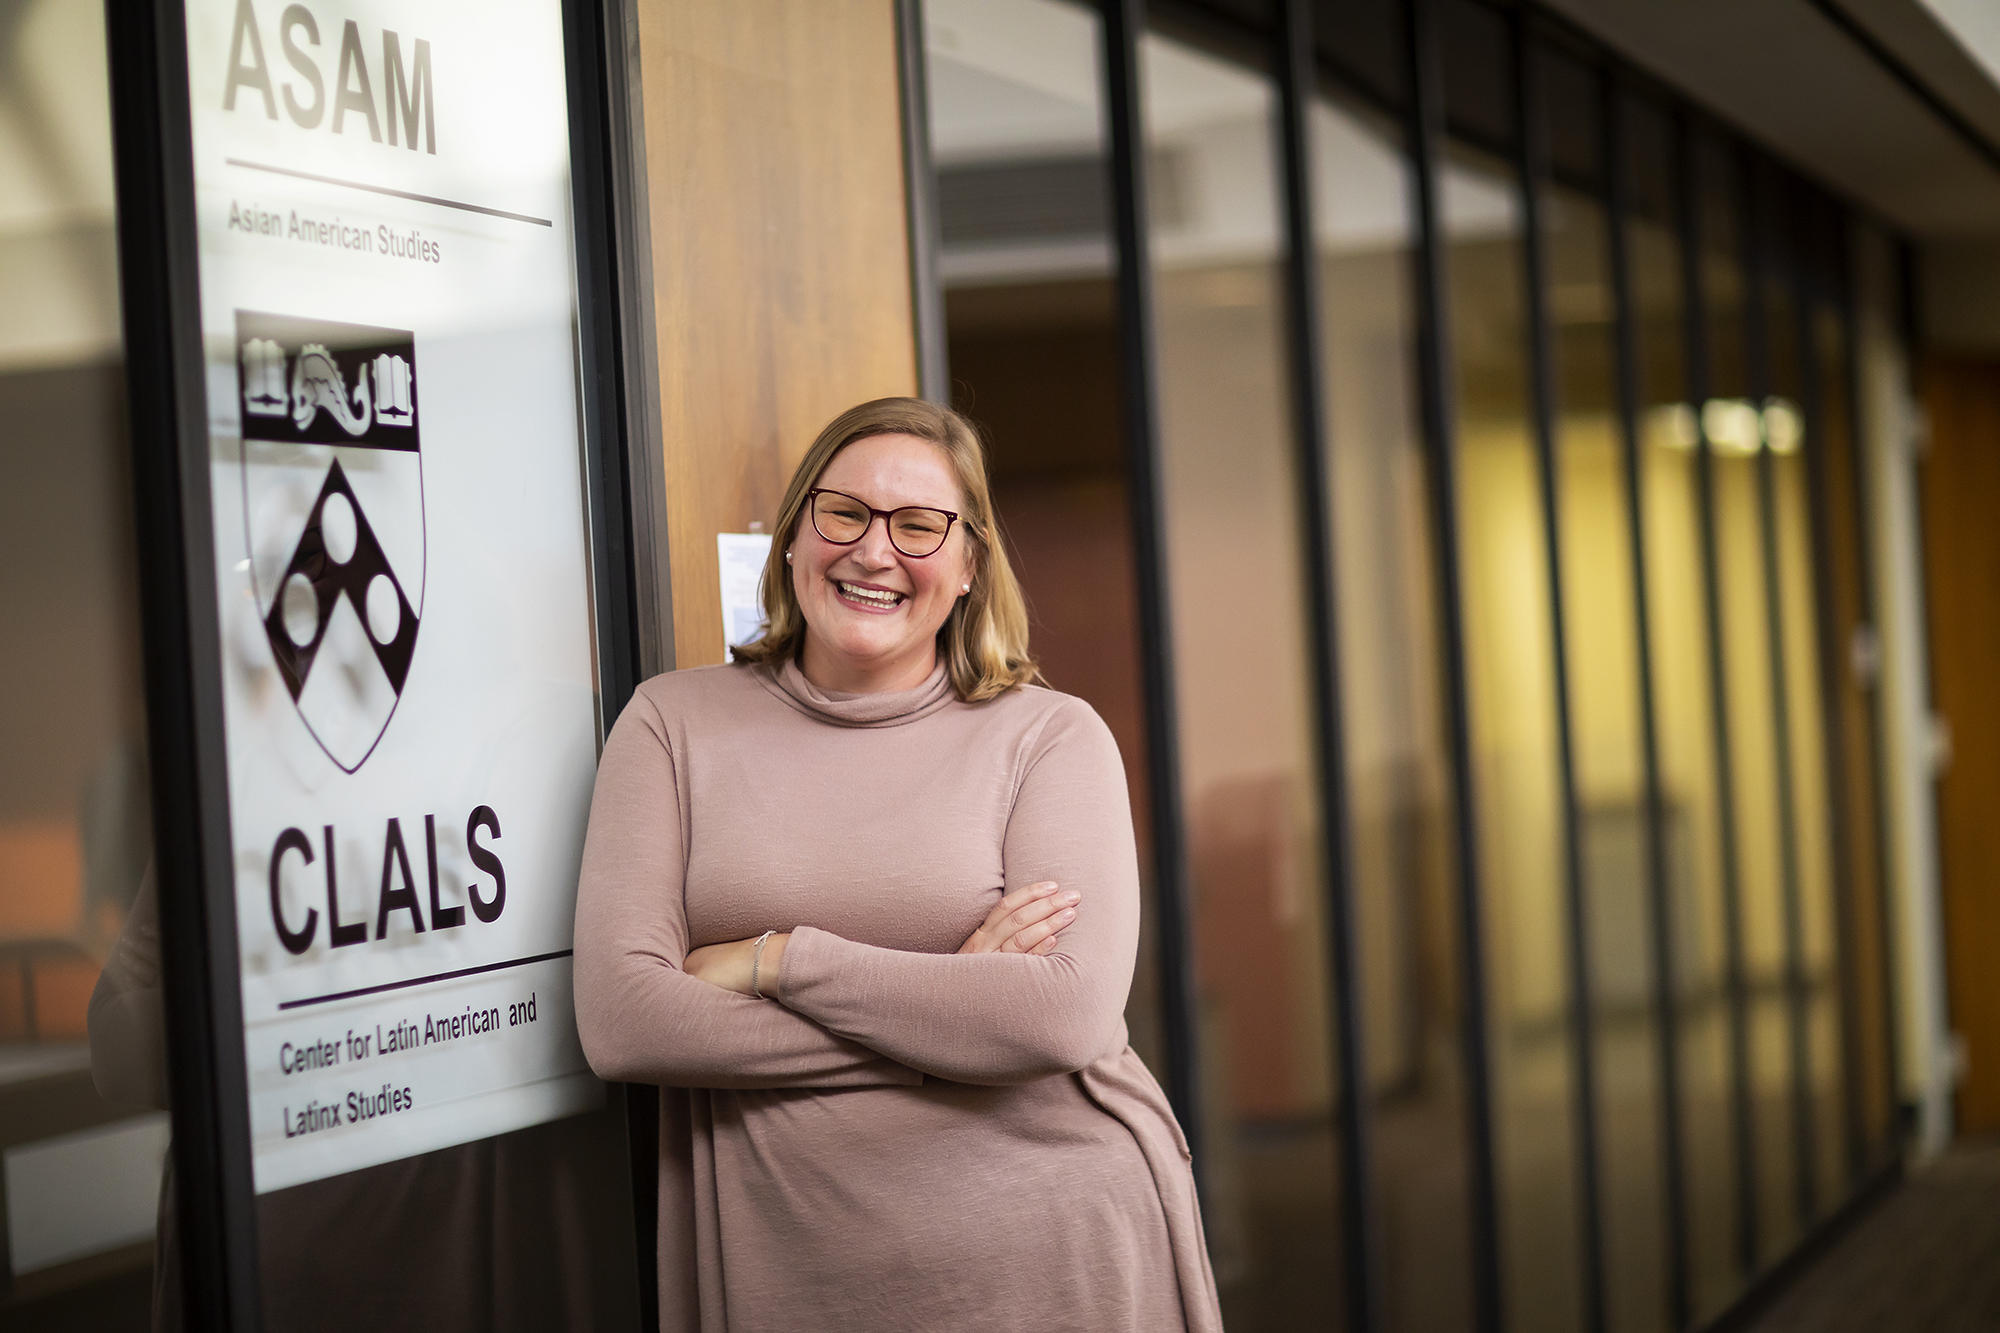 Lucia Stavig poses in front of the Center for Latin American and Latinx Studies (CLALS)